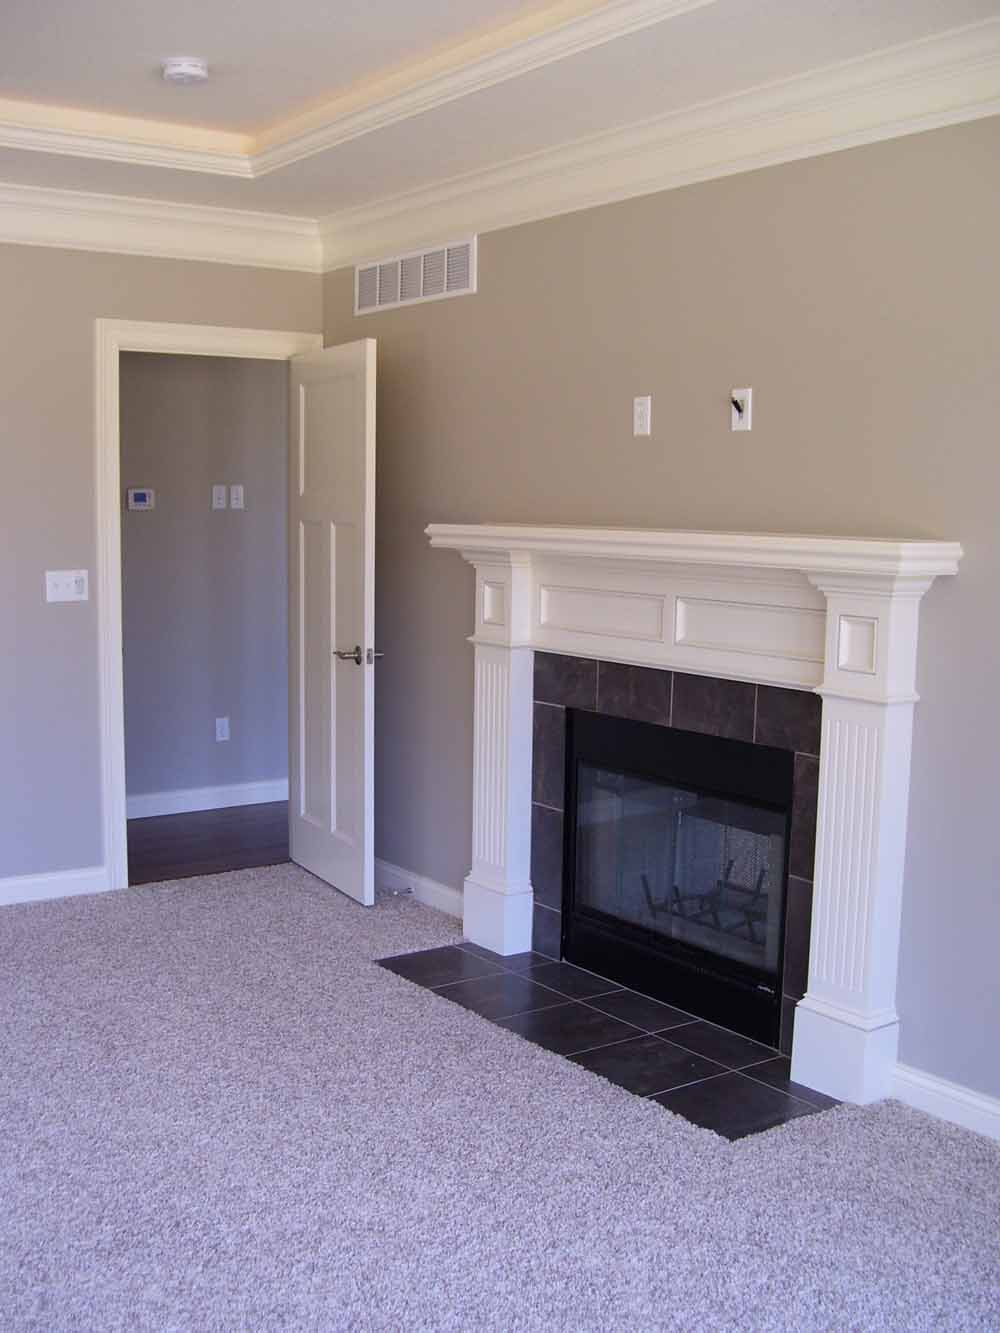 2 sided fireplace in master bedroom